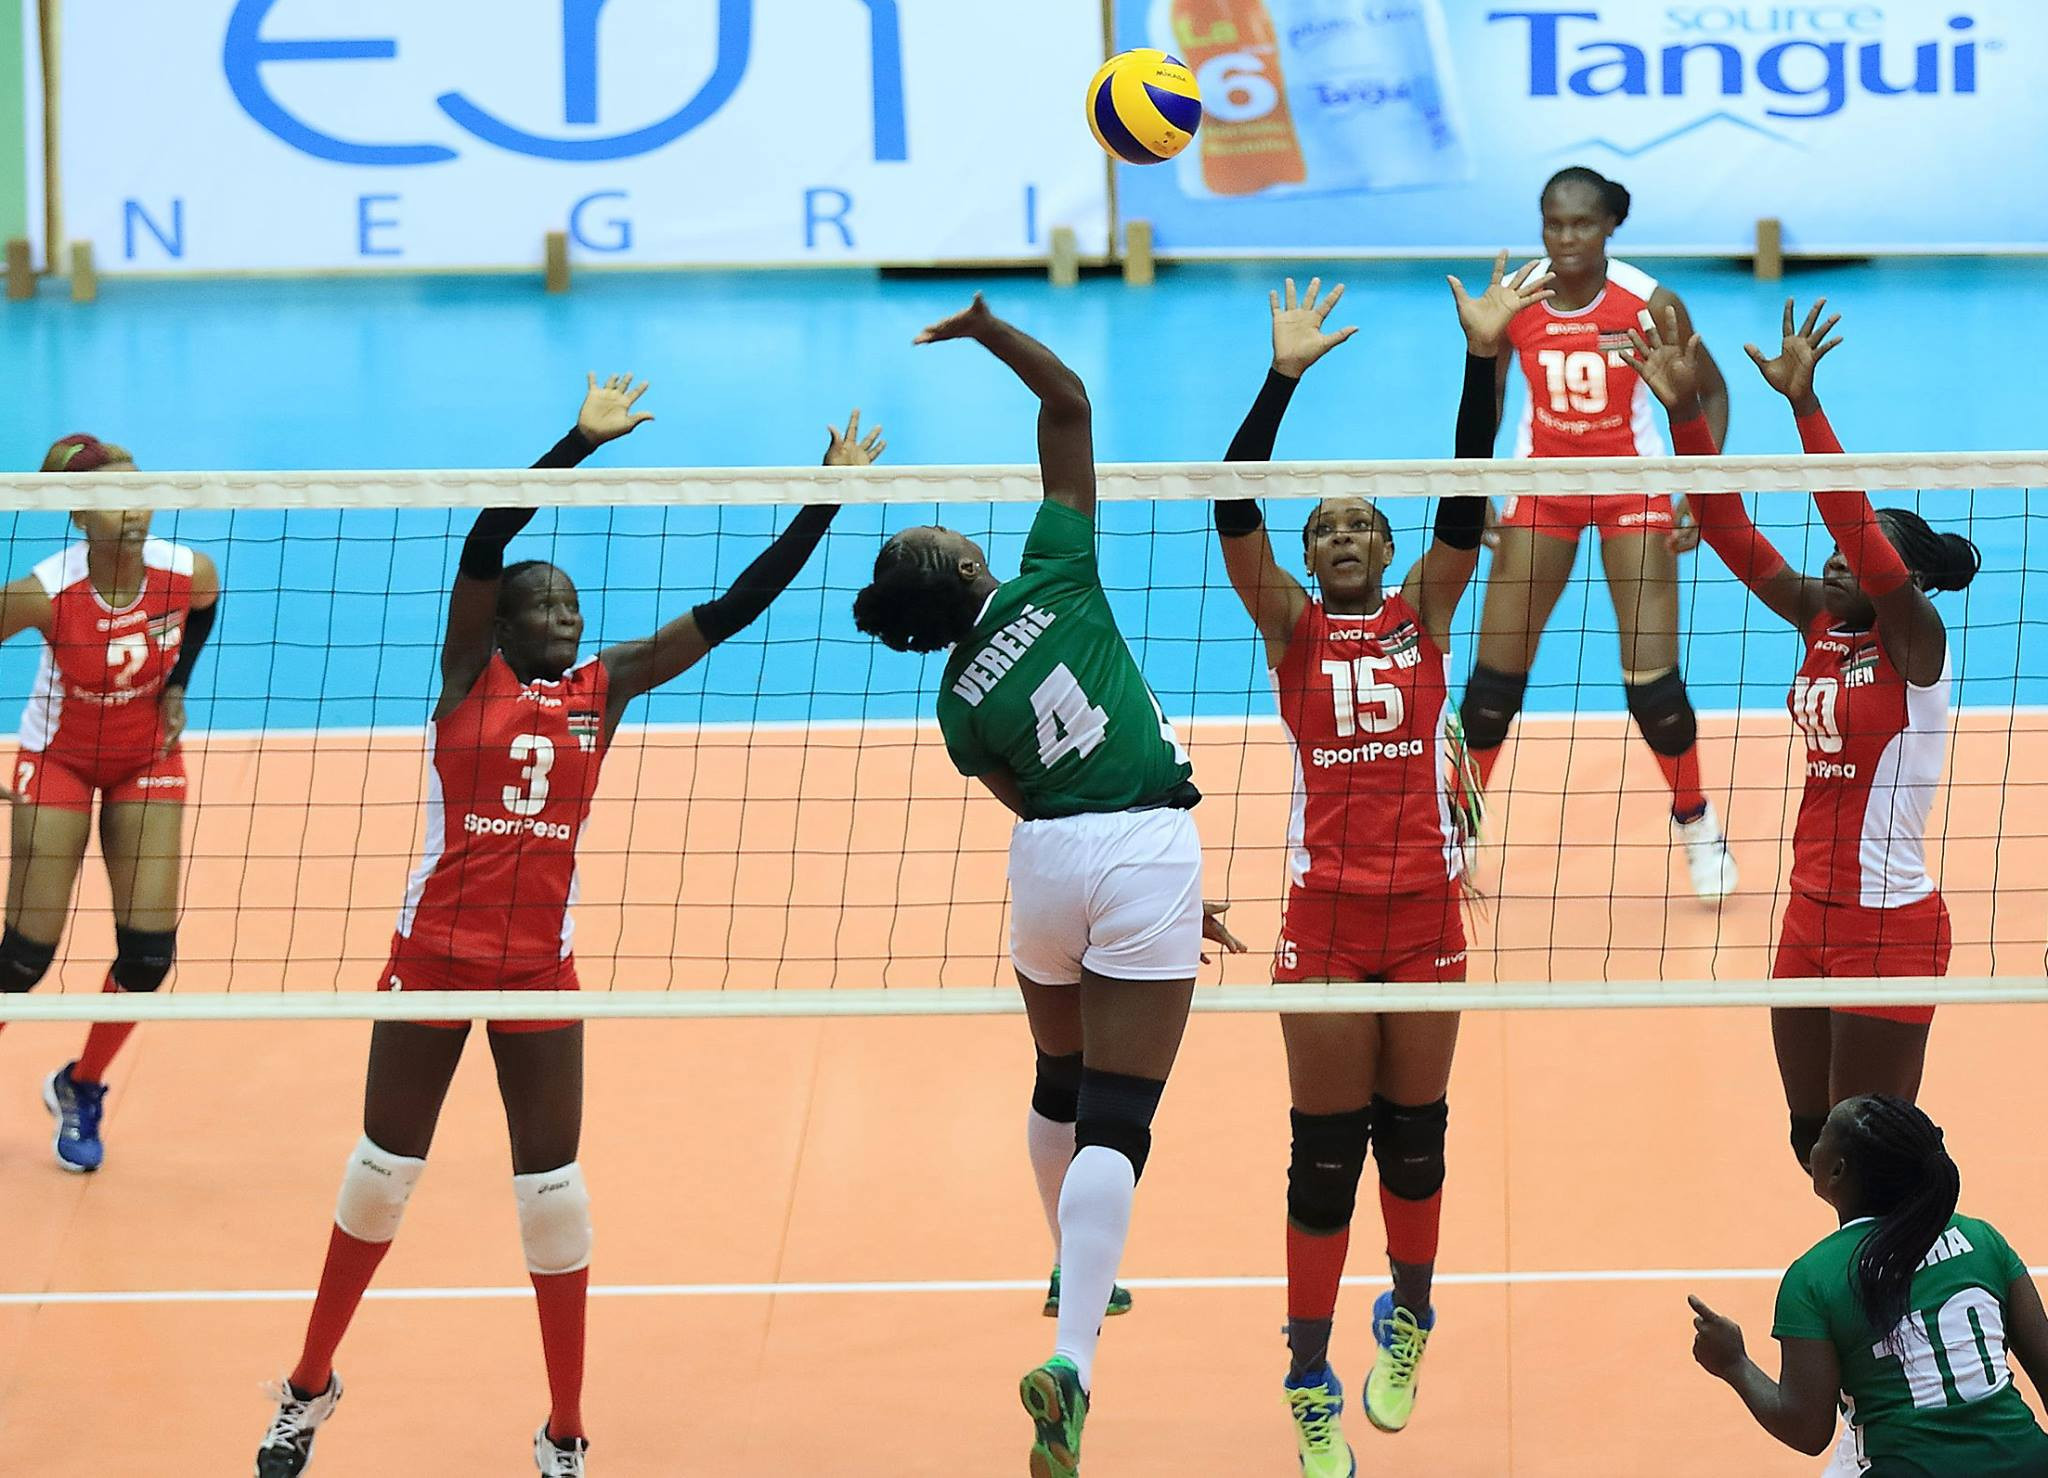 Kenya eased past Nigeria in straight sets to begin with victory ©CAVB